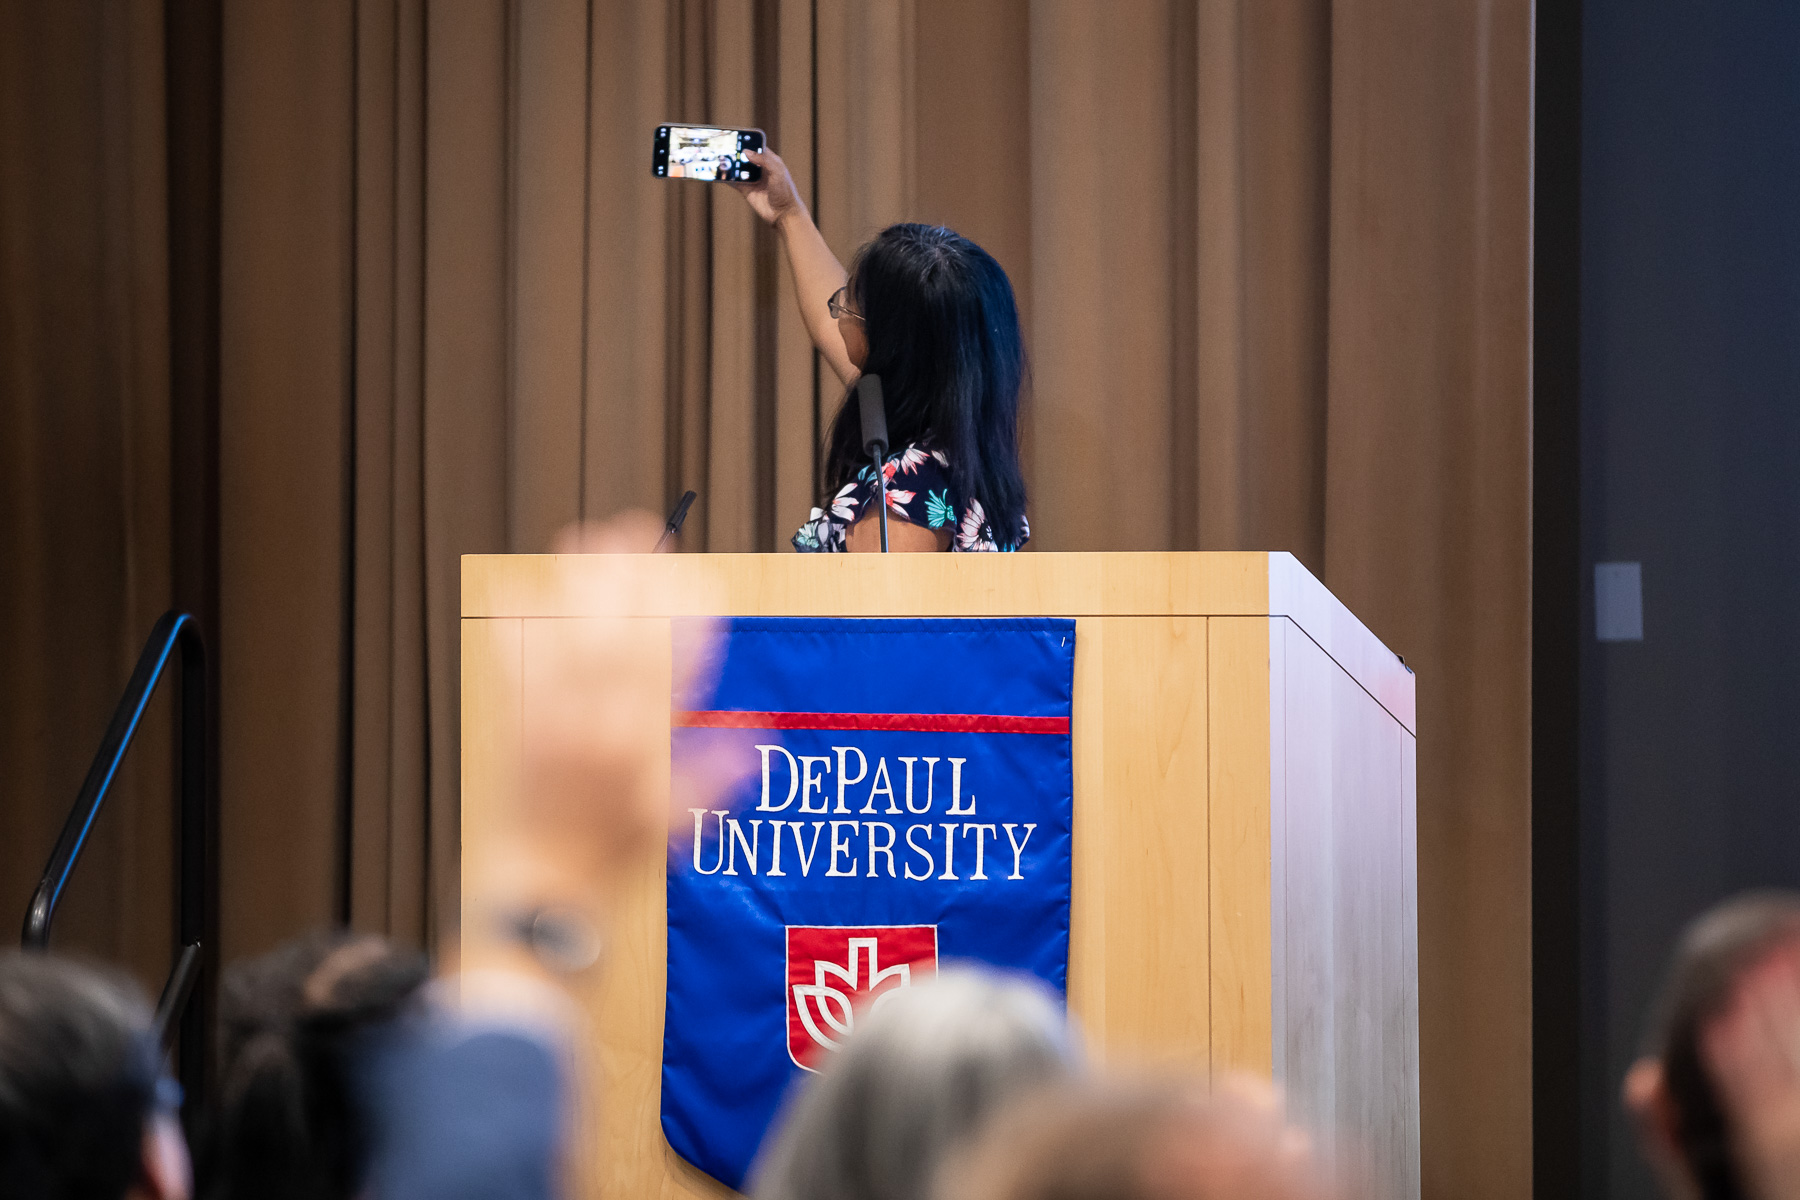 As one of DePaul's social media content editors, Maria Hench takes a selfie of herself and the audience following her speech.